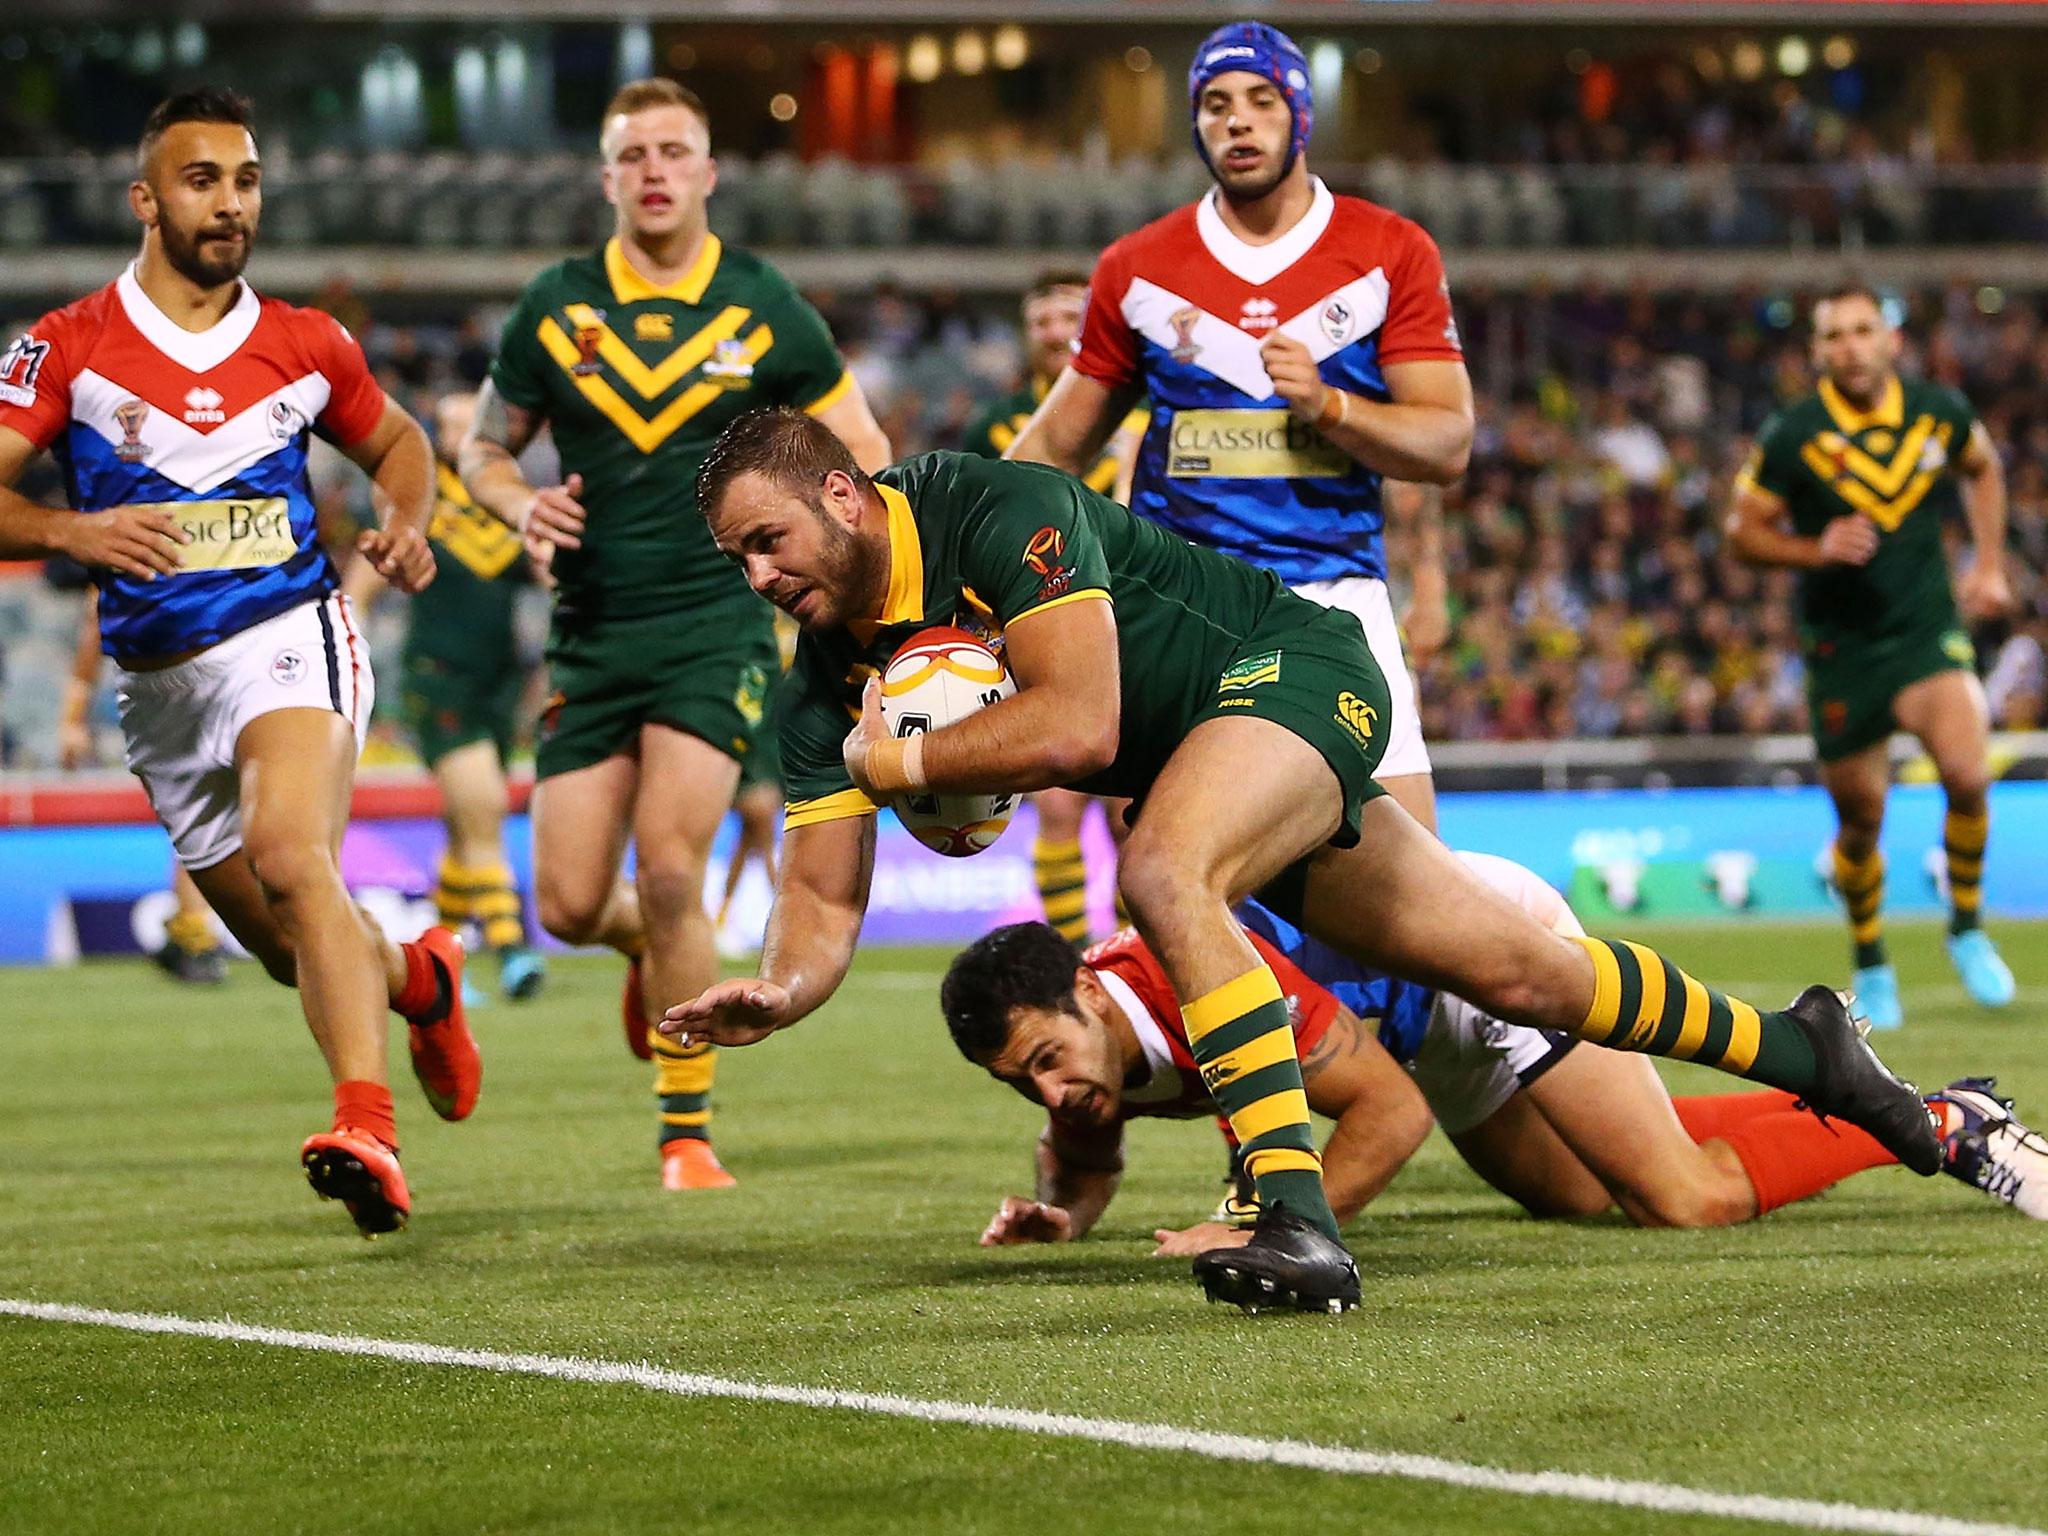 &#13;
Graham helped himself to four tries against the French &#13;